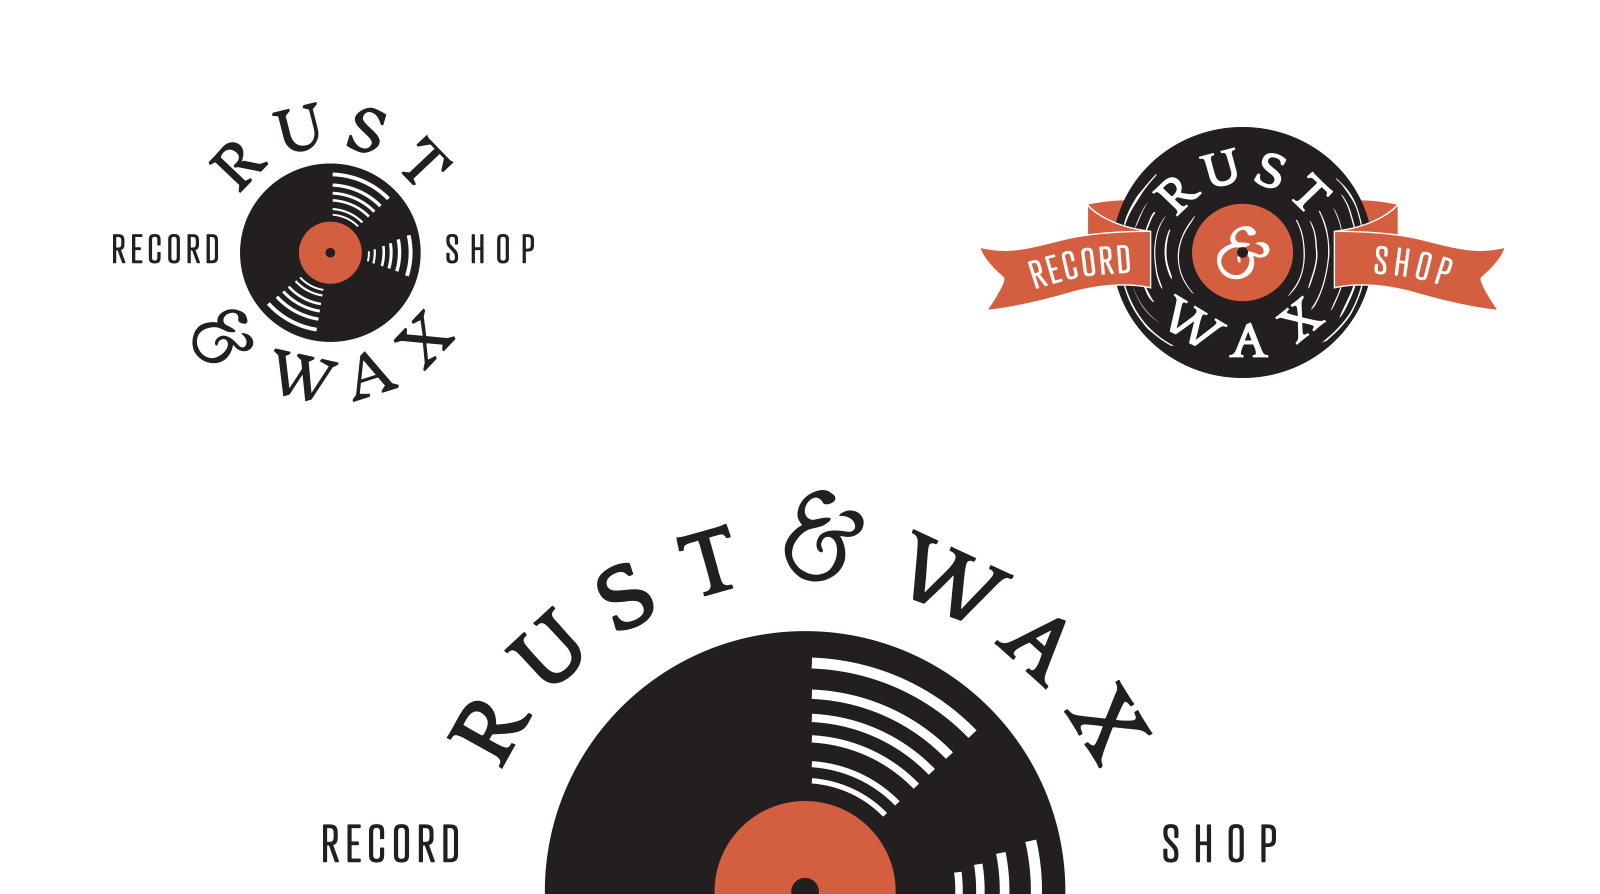 Rust & Wax illustrative record logo design explorations featuring type curving around, as well as inside of the record.